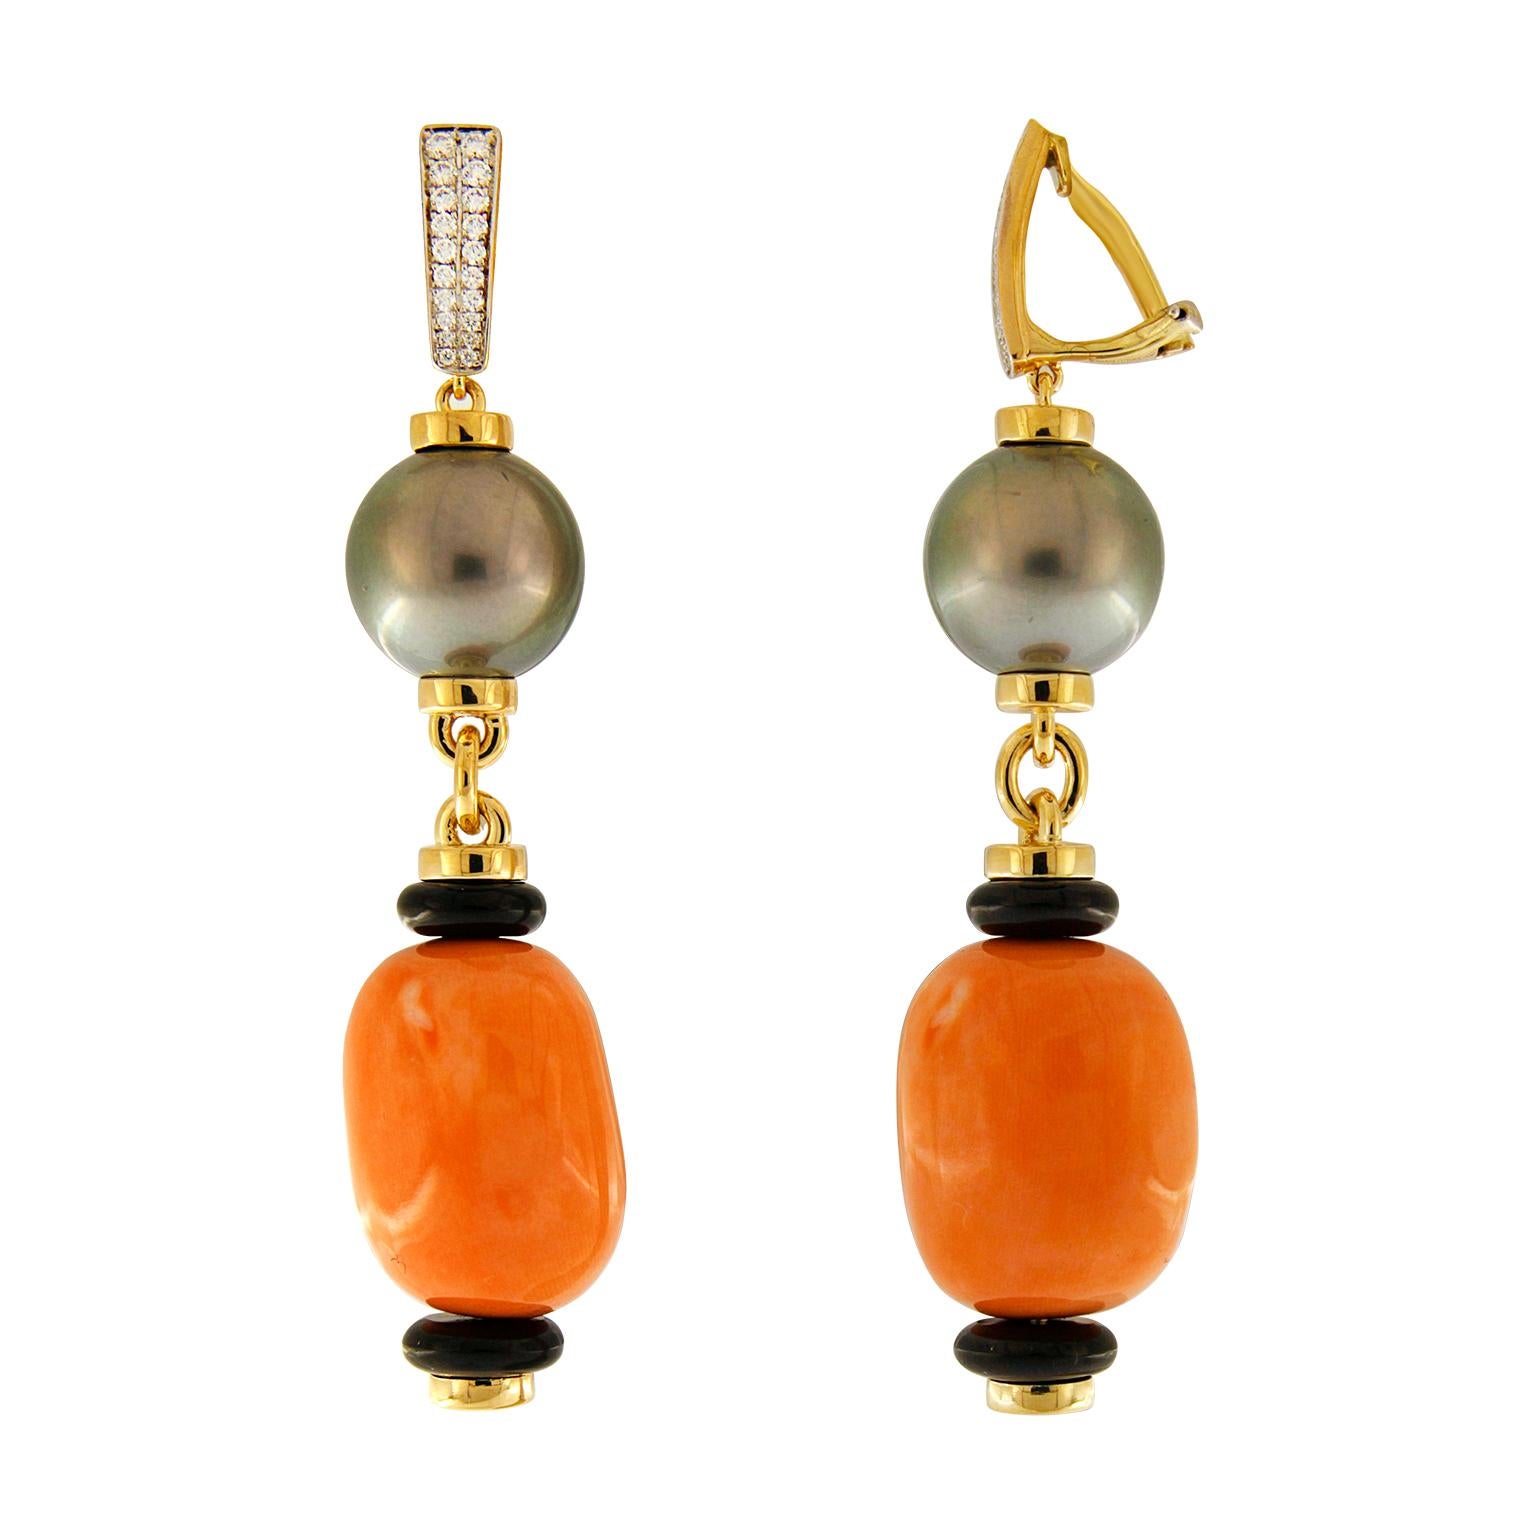 The sea inspired these drop earrings. Each piece boasts a Tahitian pearl hanging from a round brilliant cut diamond base. Roundels in 18k yellow gold sit above and below the pearls, coordinating with the jewels' iridescence. The bottom of the